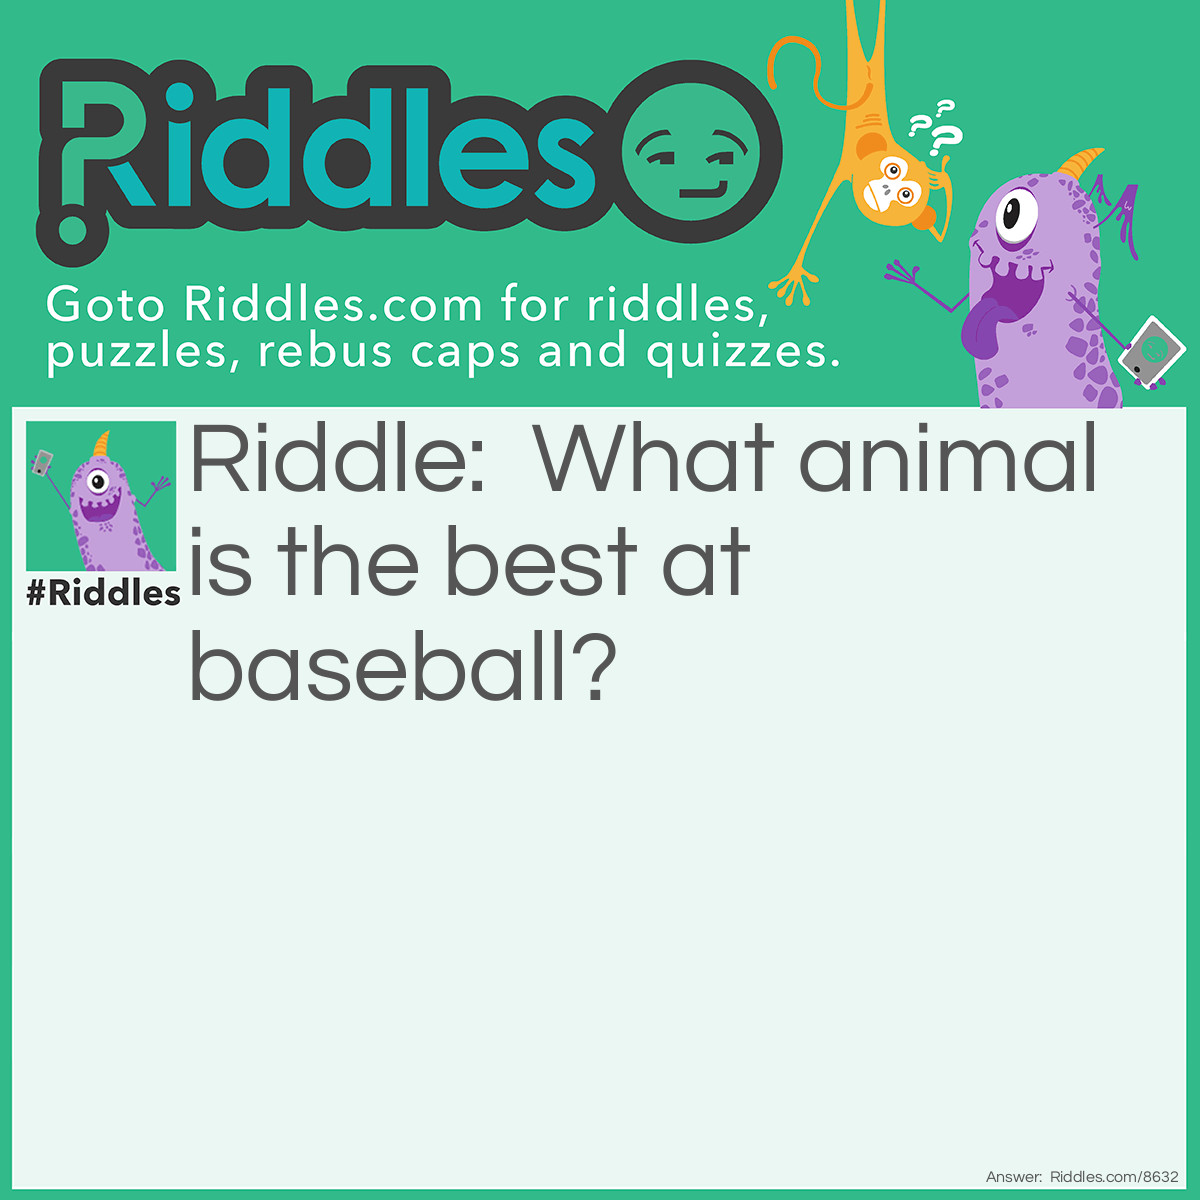 Animal Playing Baseball Riddle... Riddle And Answer - Riddles.com